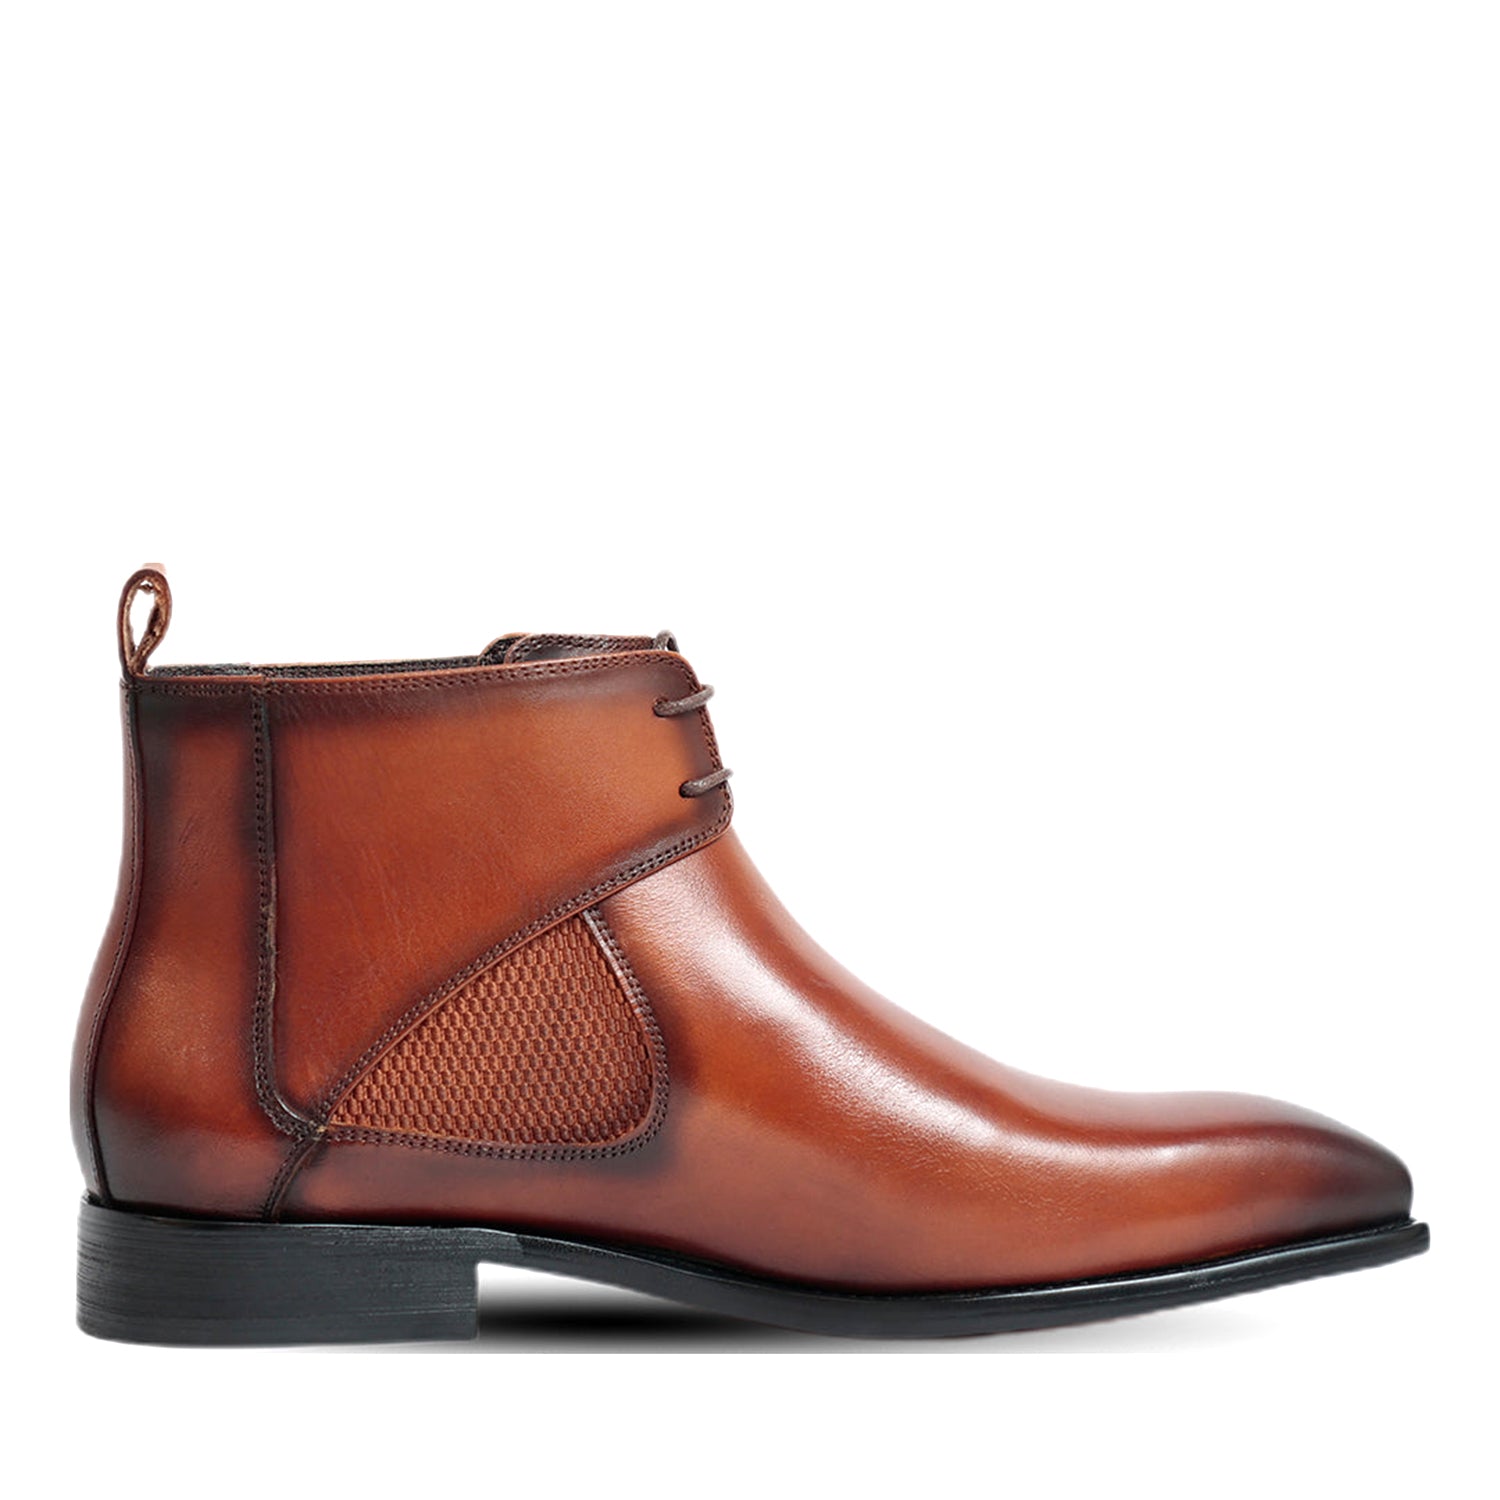 Stanford Chukka Brown Shoes